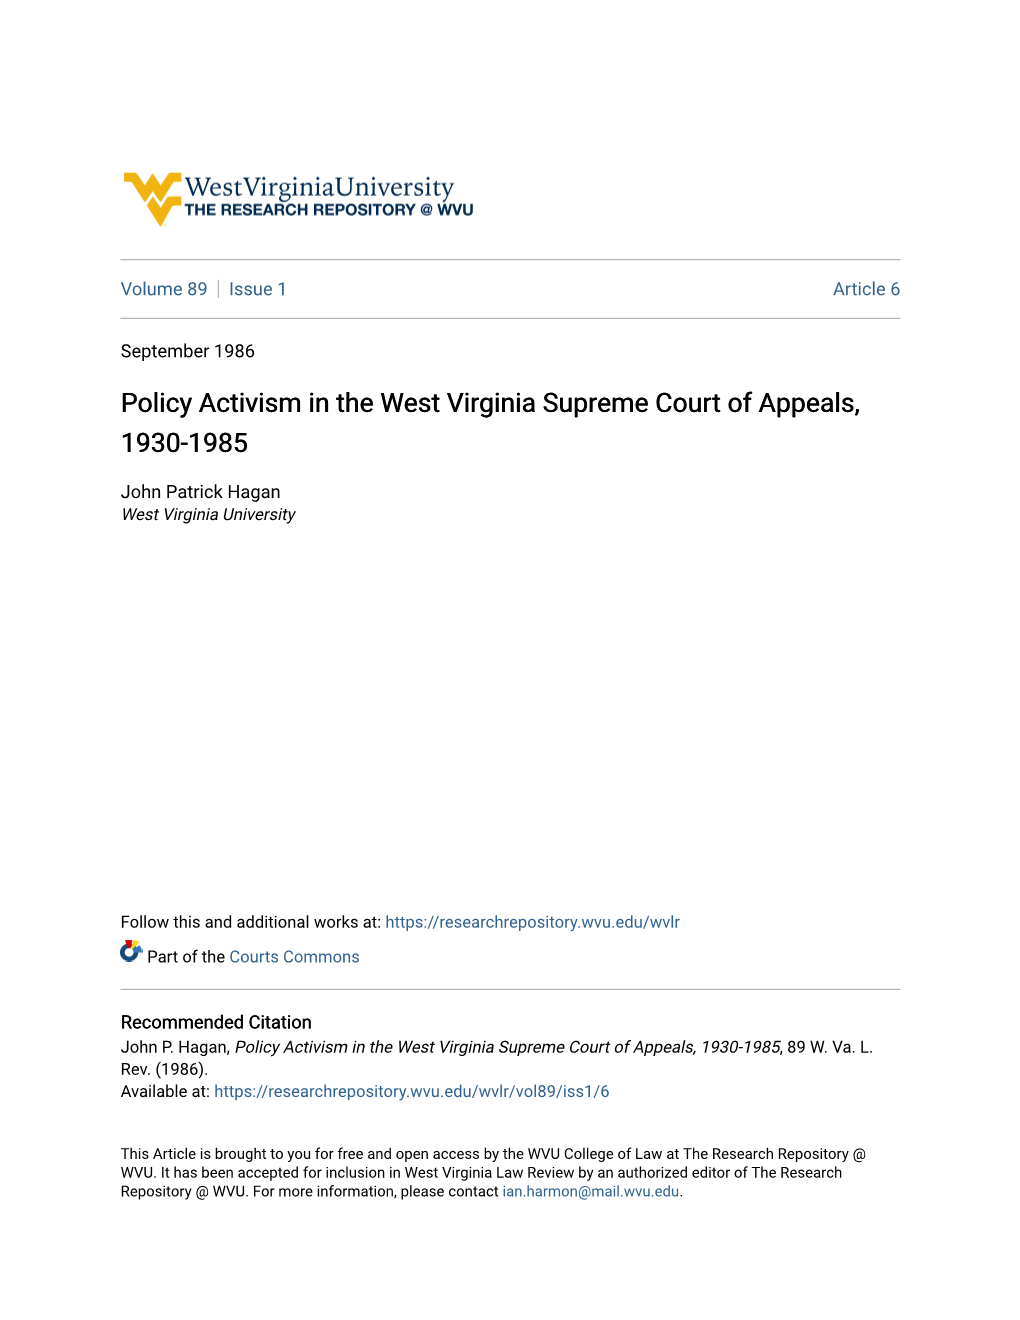 Policy Activism in the West Virginia Supreme Court of Appeals, 1930-1985